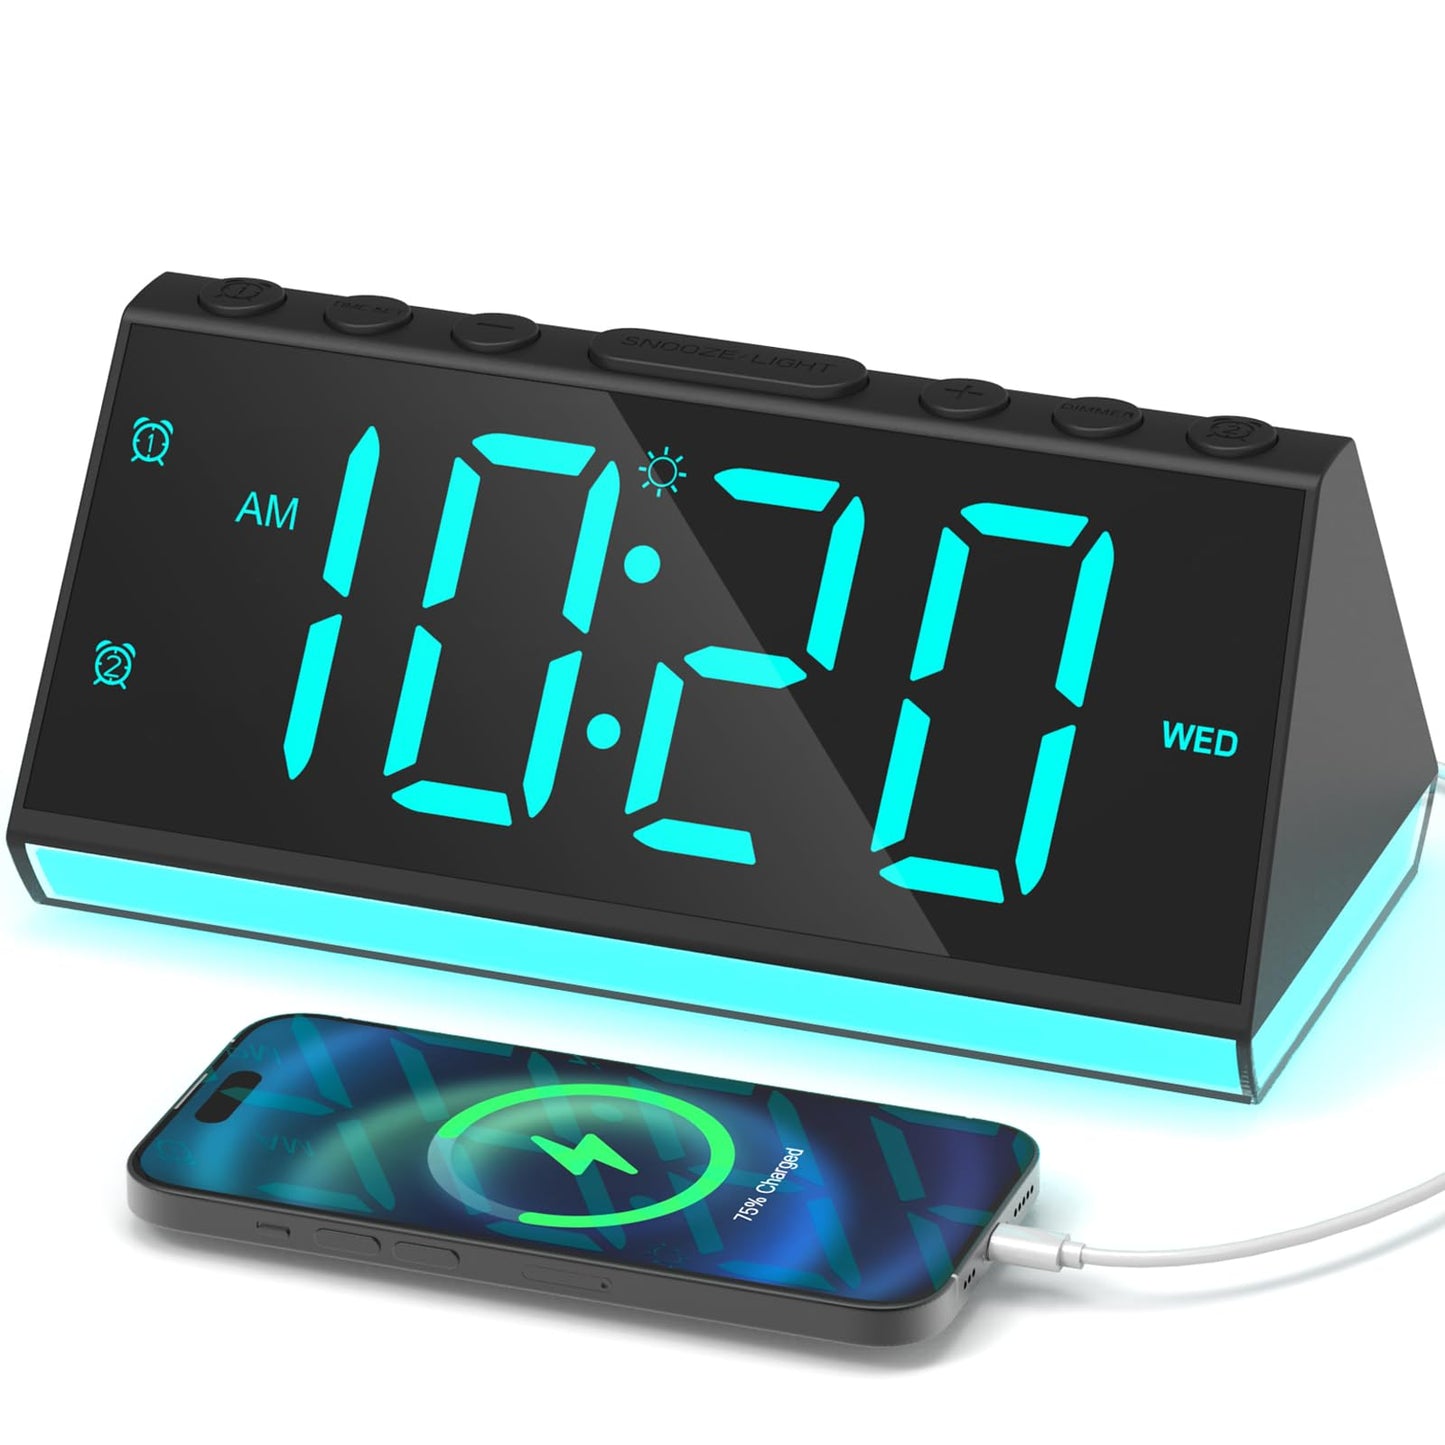 Alarm Clocks for Bedrooms, Digital Kids Alarm Clock Night Light with USB Chargers, Large Number, Dimmer, Dual Alarm, Loud Bedside Clock for Heavy Sleepers Teens Living Room Desk Nightstand, Plug-in